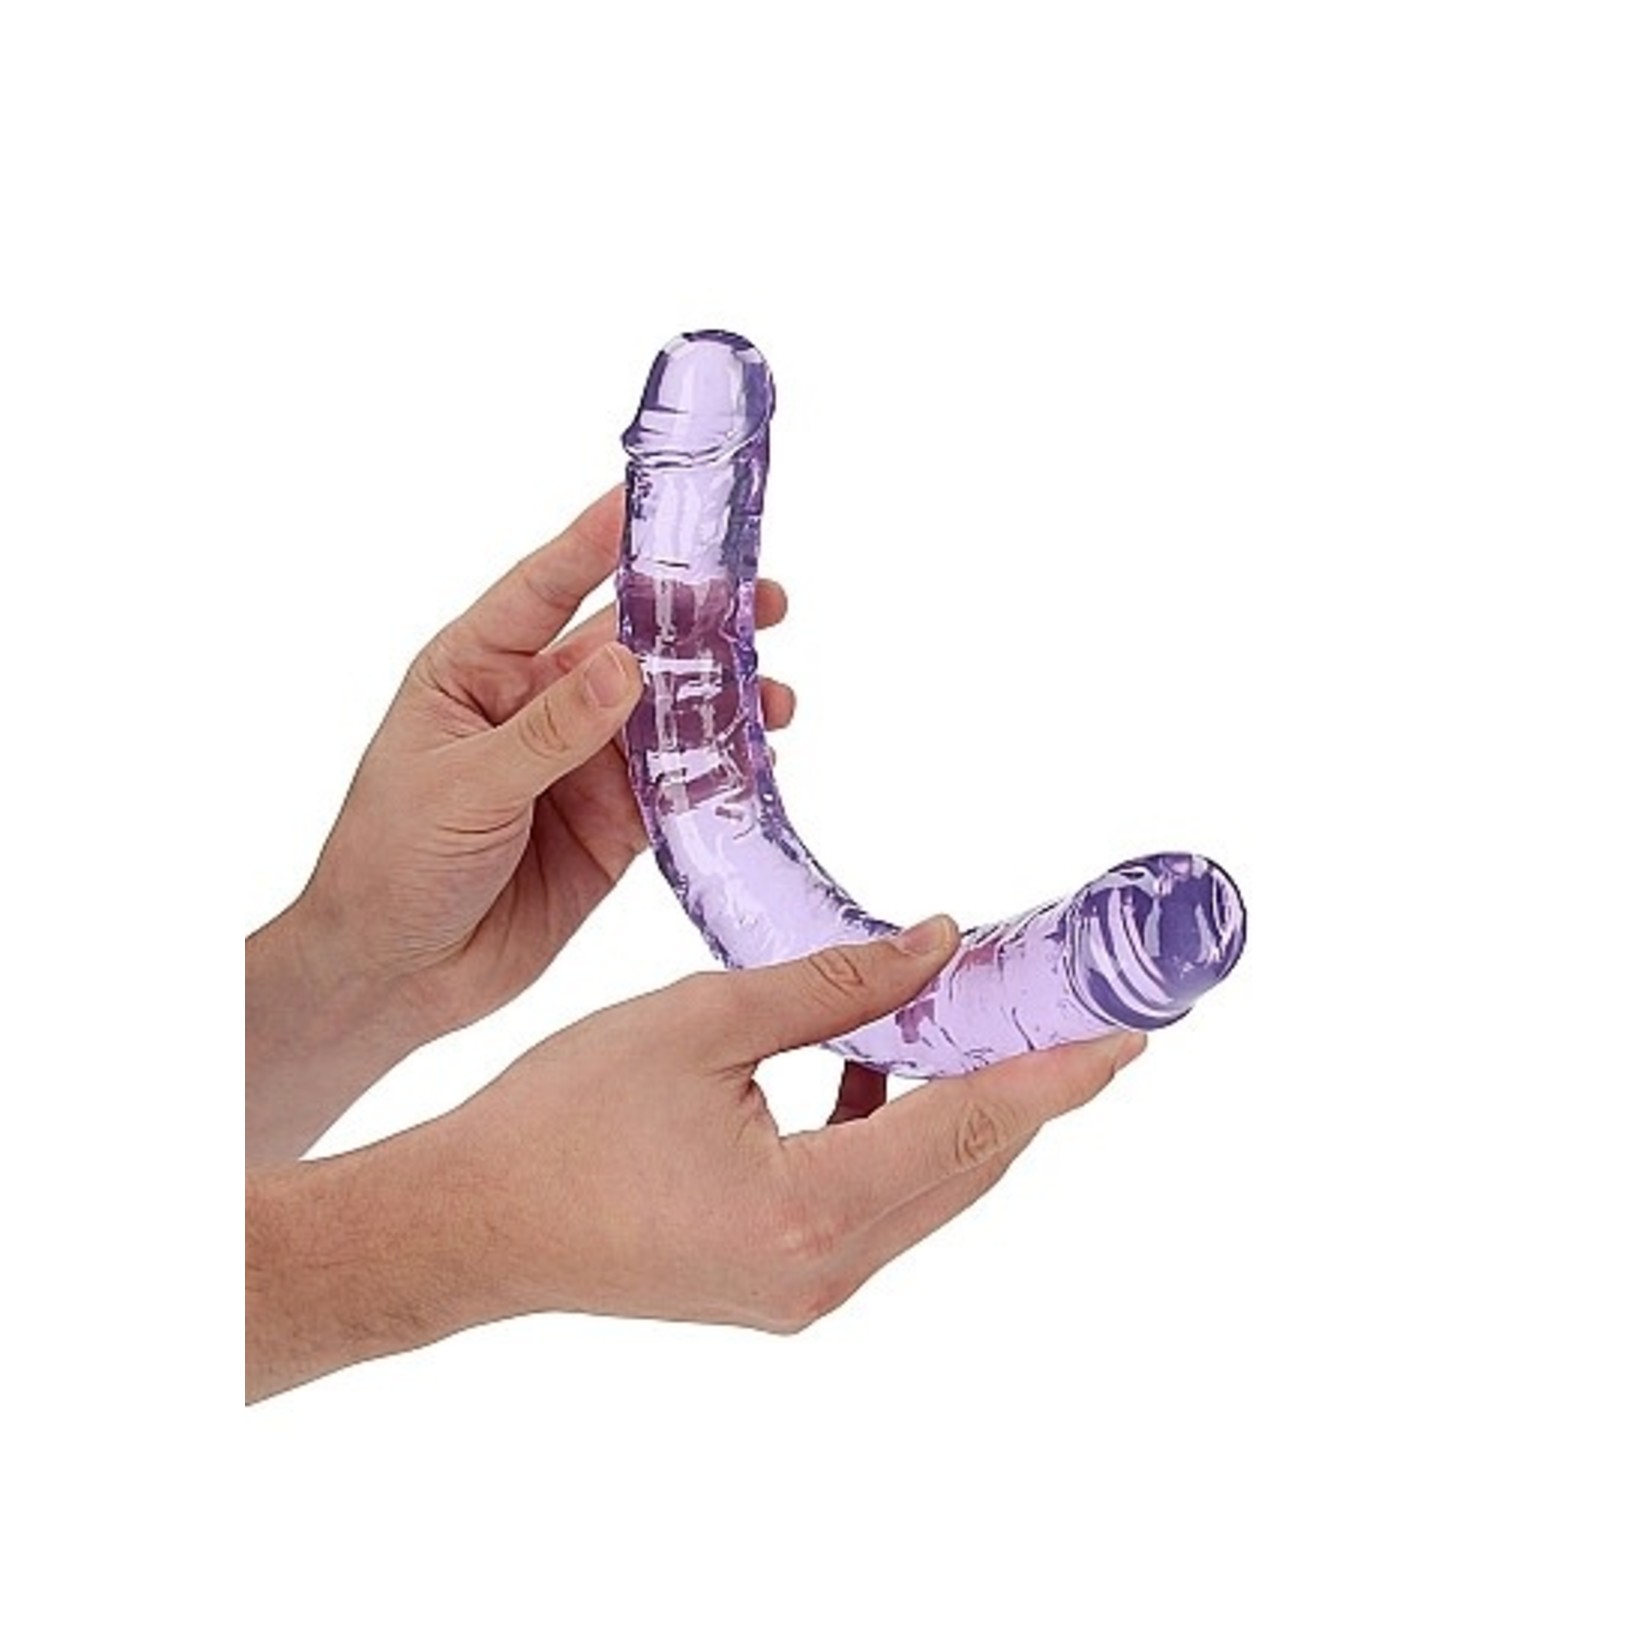 SHOTS REALROCK CRYSTAL CLEAR JELLY 13 INCH DOUBLE DILDO